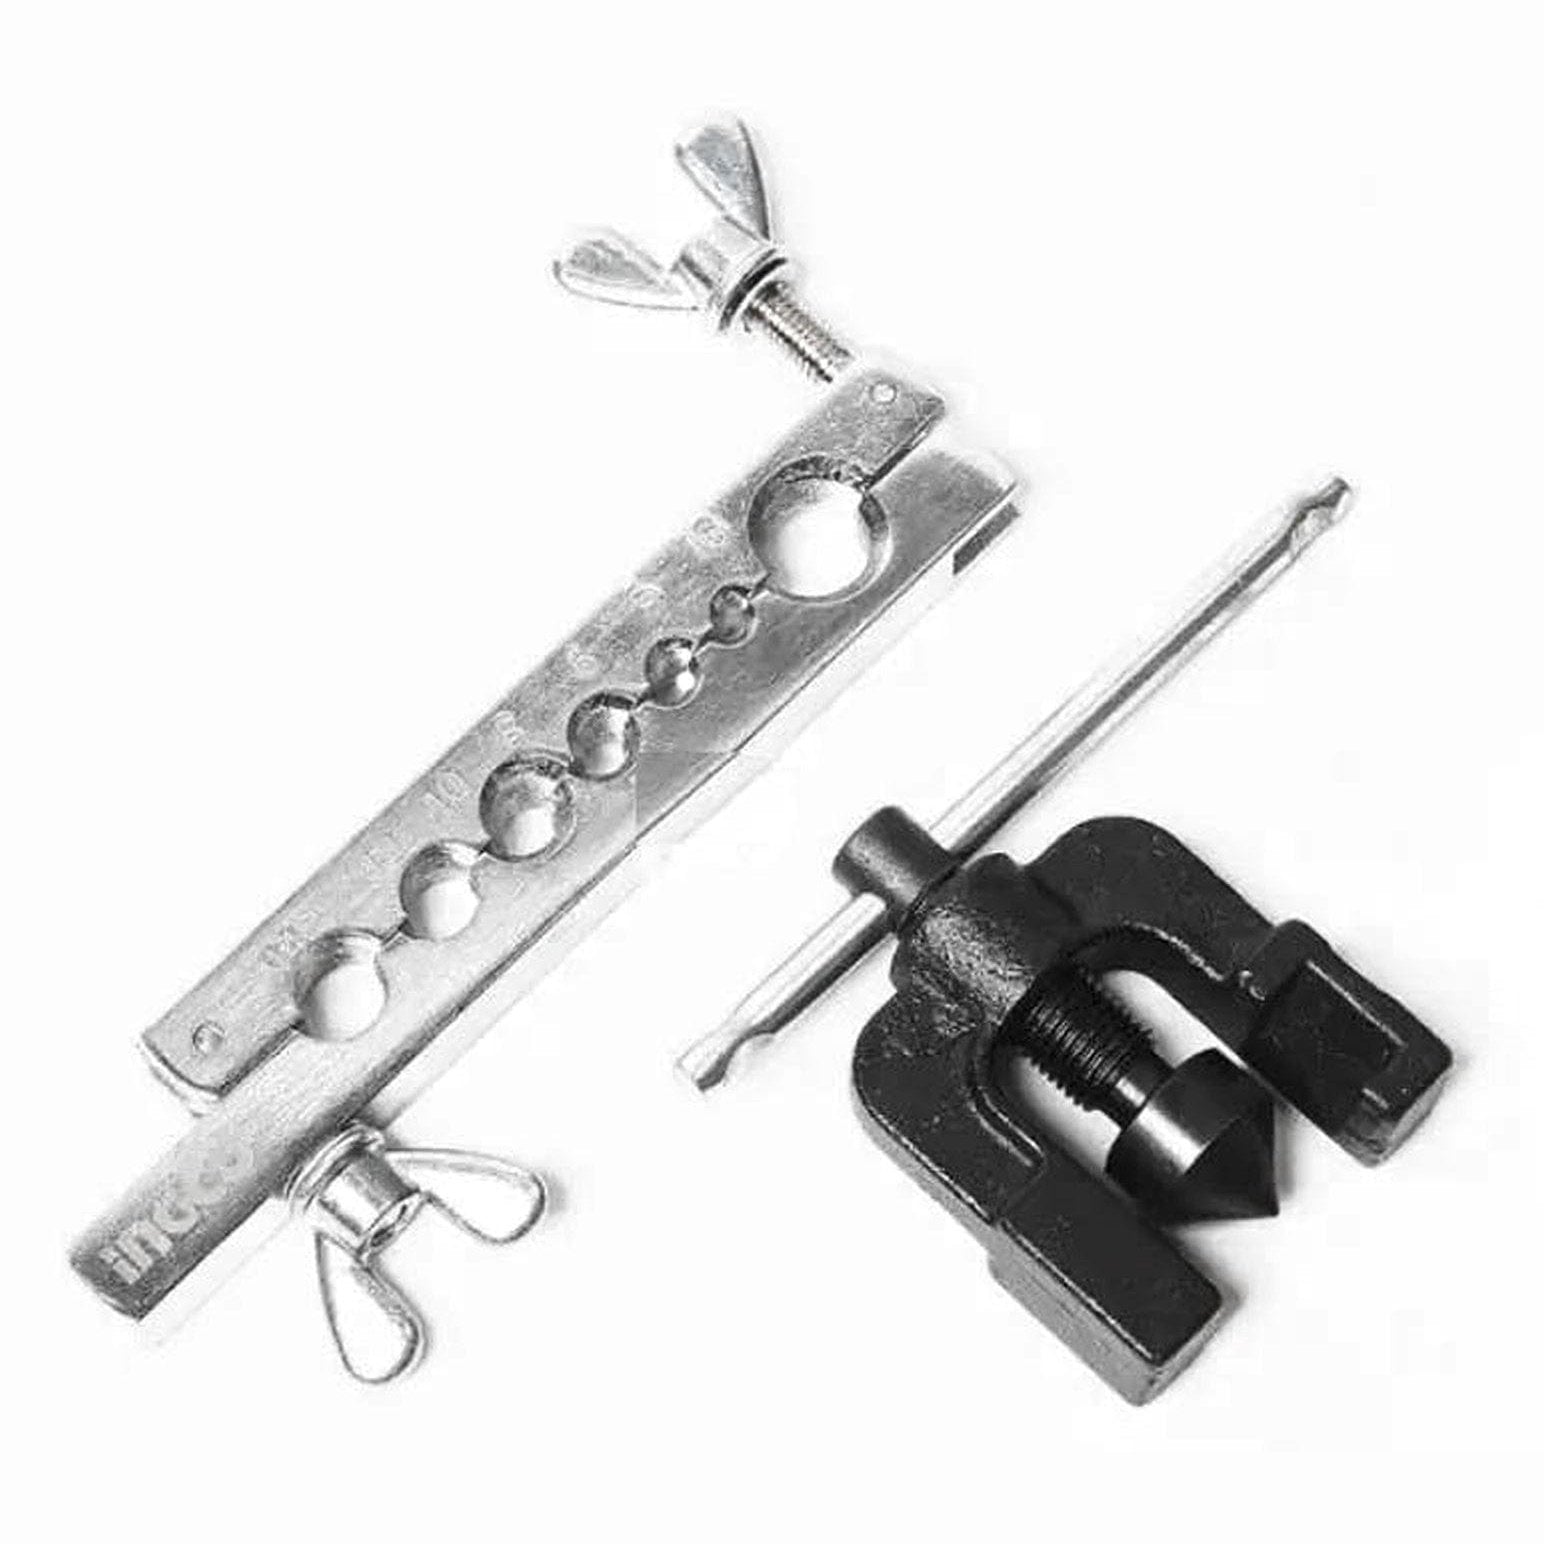 Ingco Pipe Flaring Tool Set - HPFT71 | Supply Master Accra, Ghana Hand Saws & Cutting Tools Buy Tools hardware Building materials